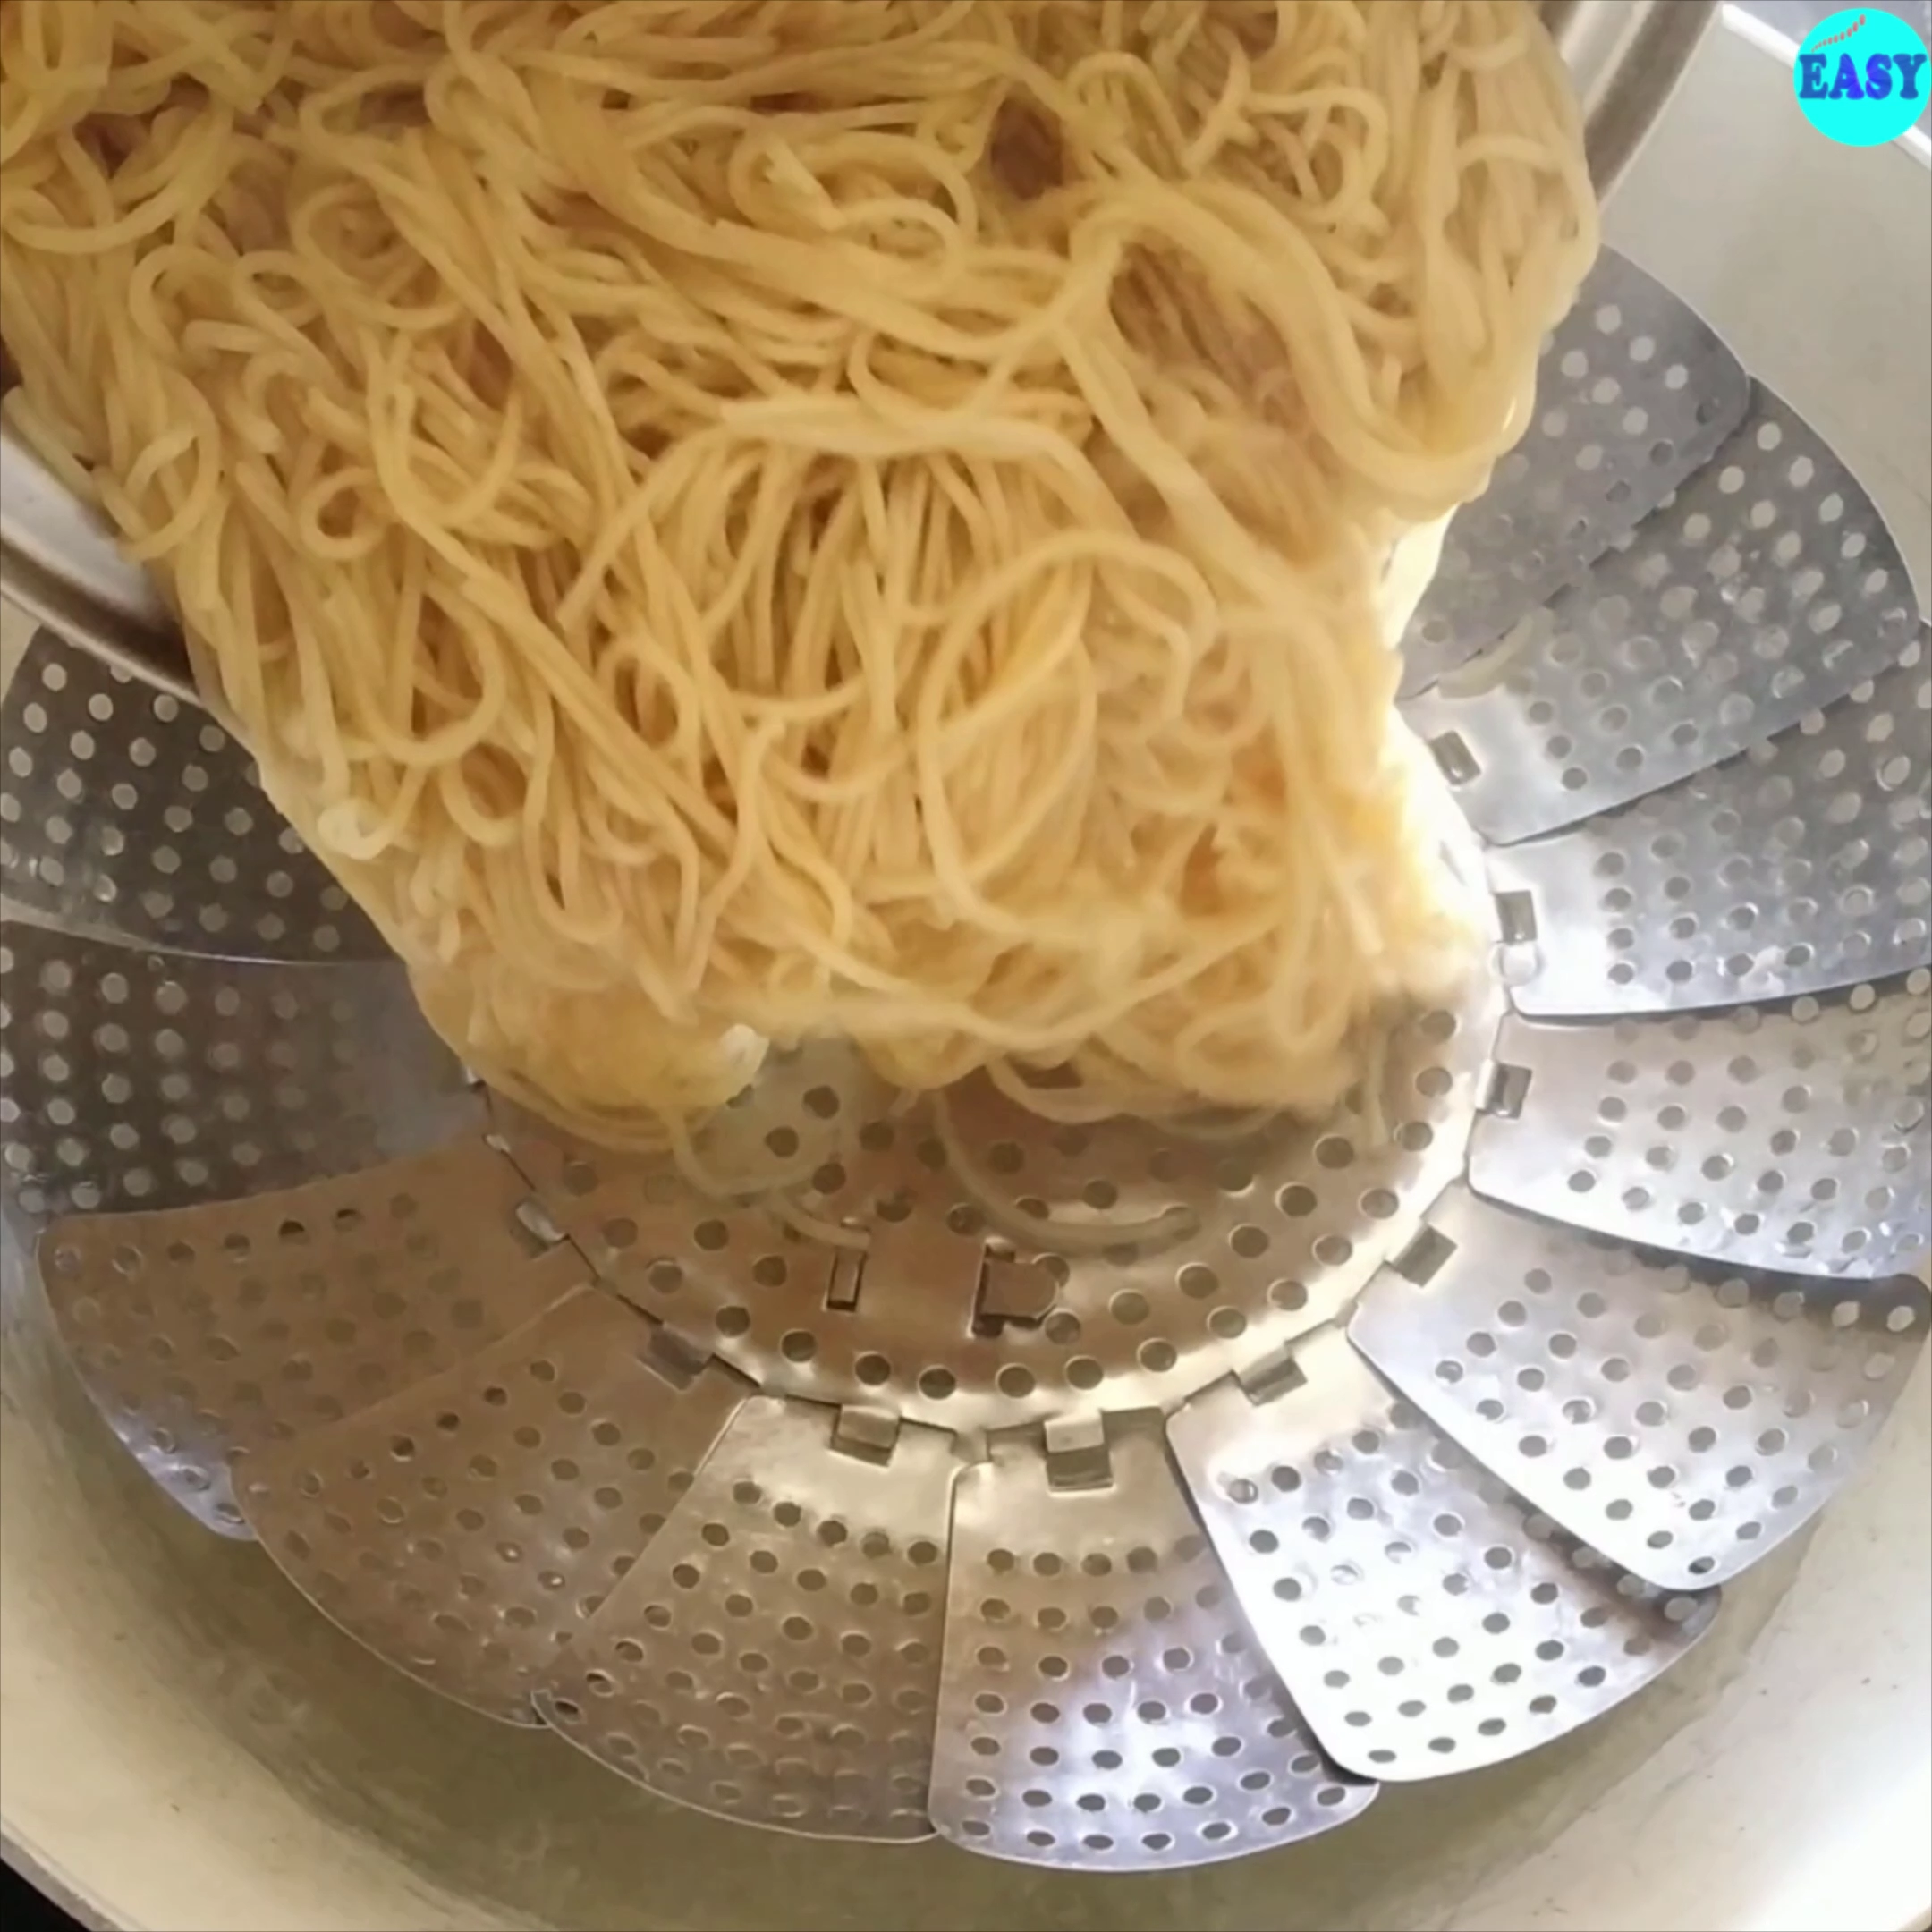 Step 2 - Once cooked remove the noodles in a strainer